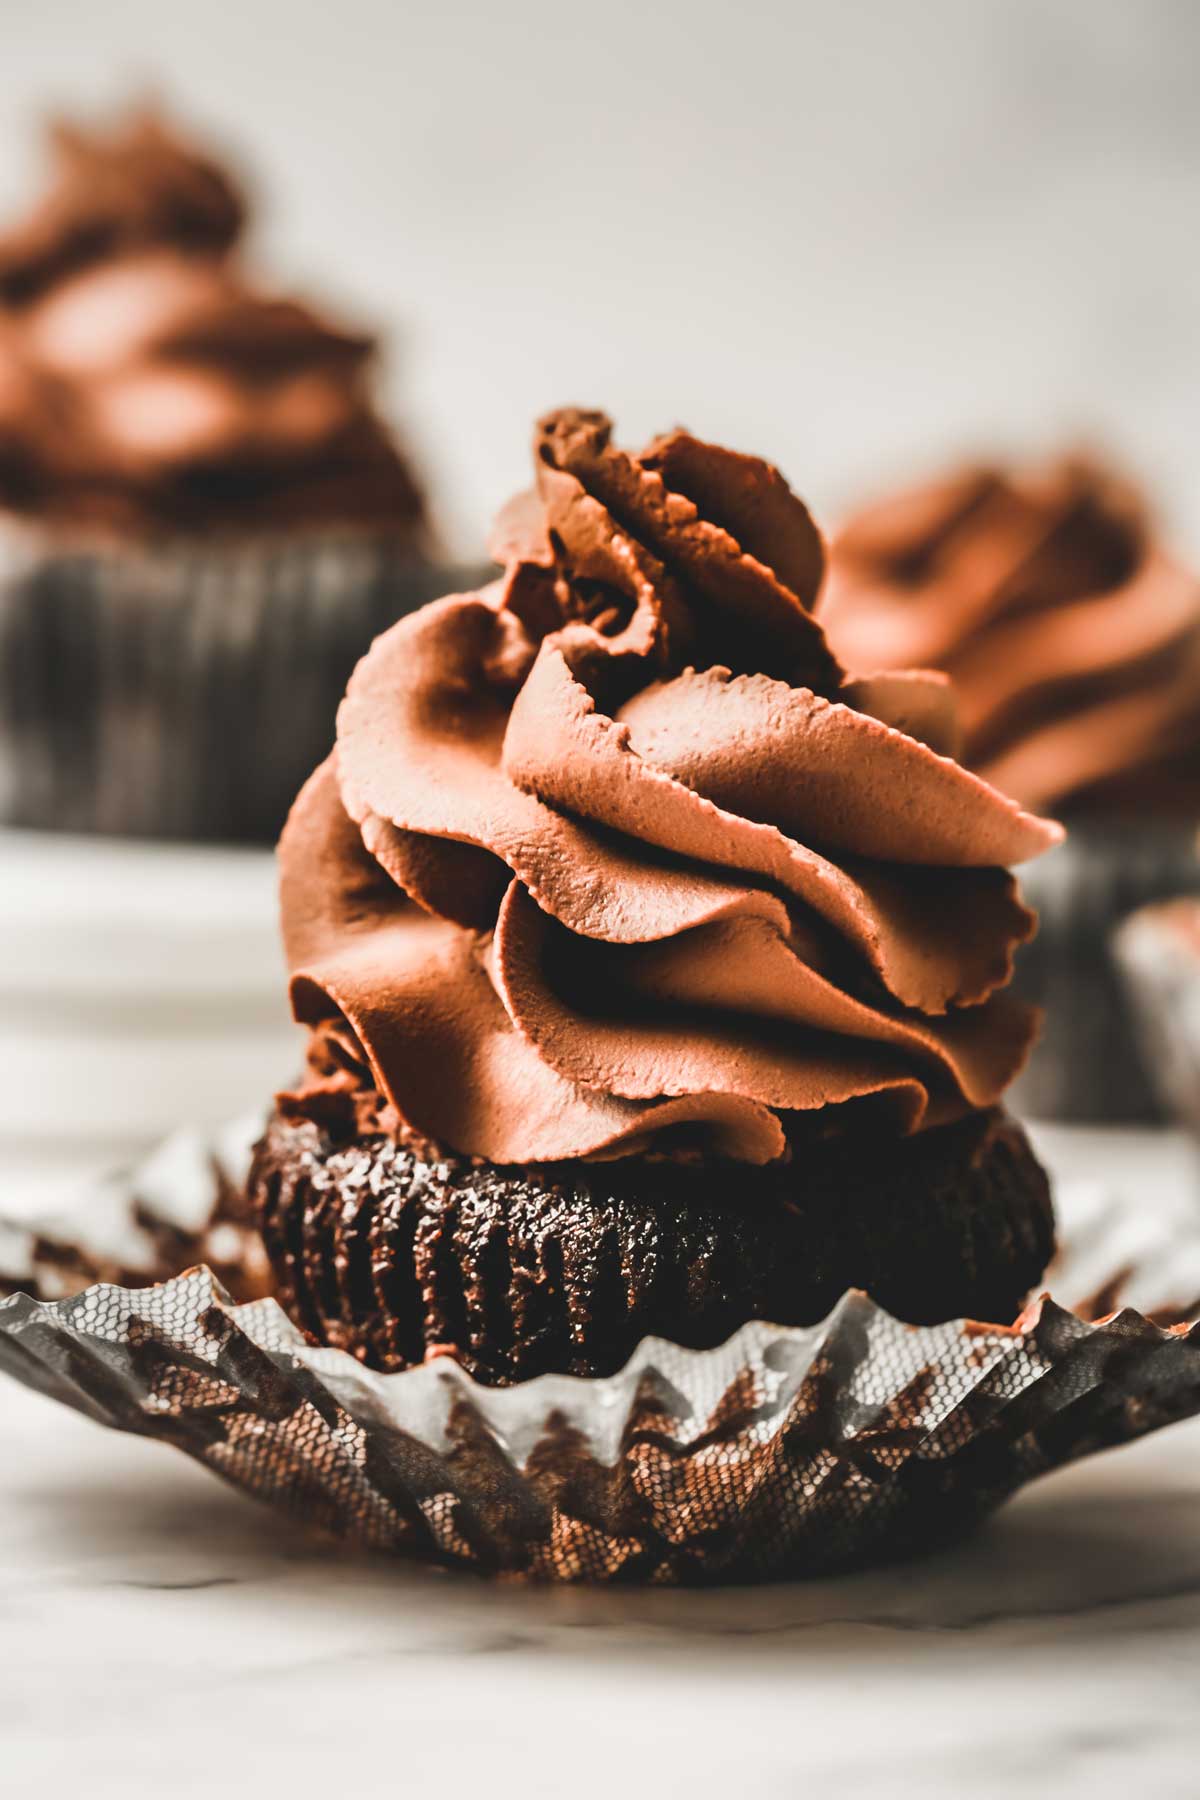 Cupcakes with whipped chocolate ganache